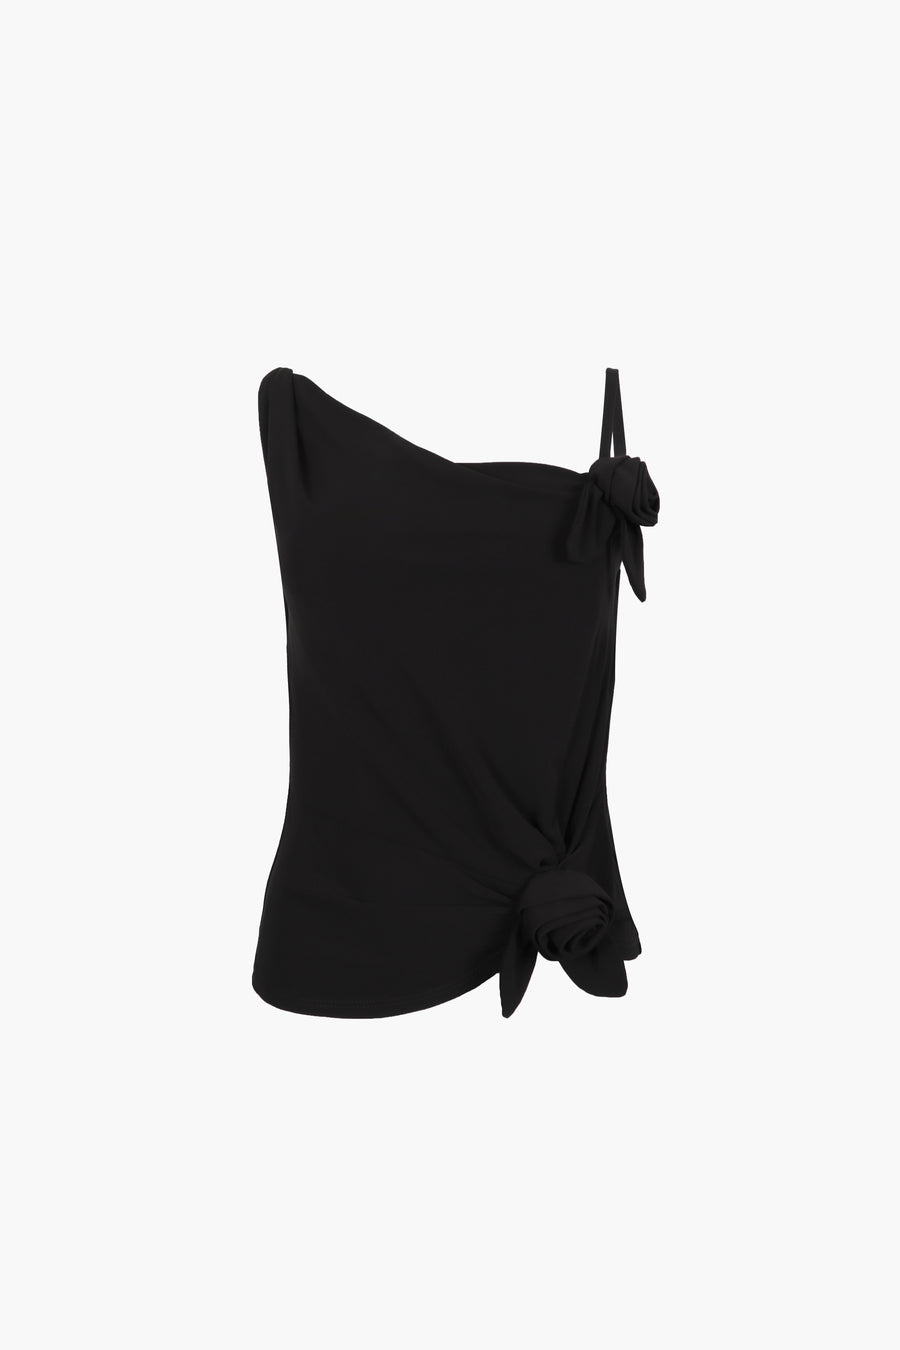 Draped asymmetric tank top in black with rosette details